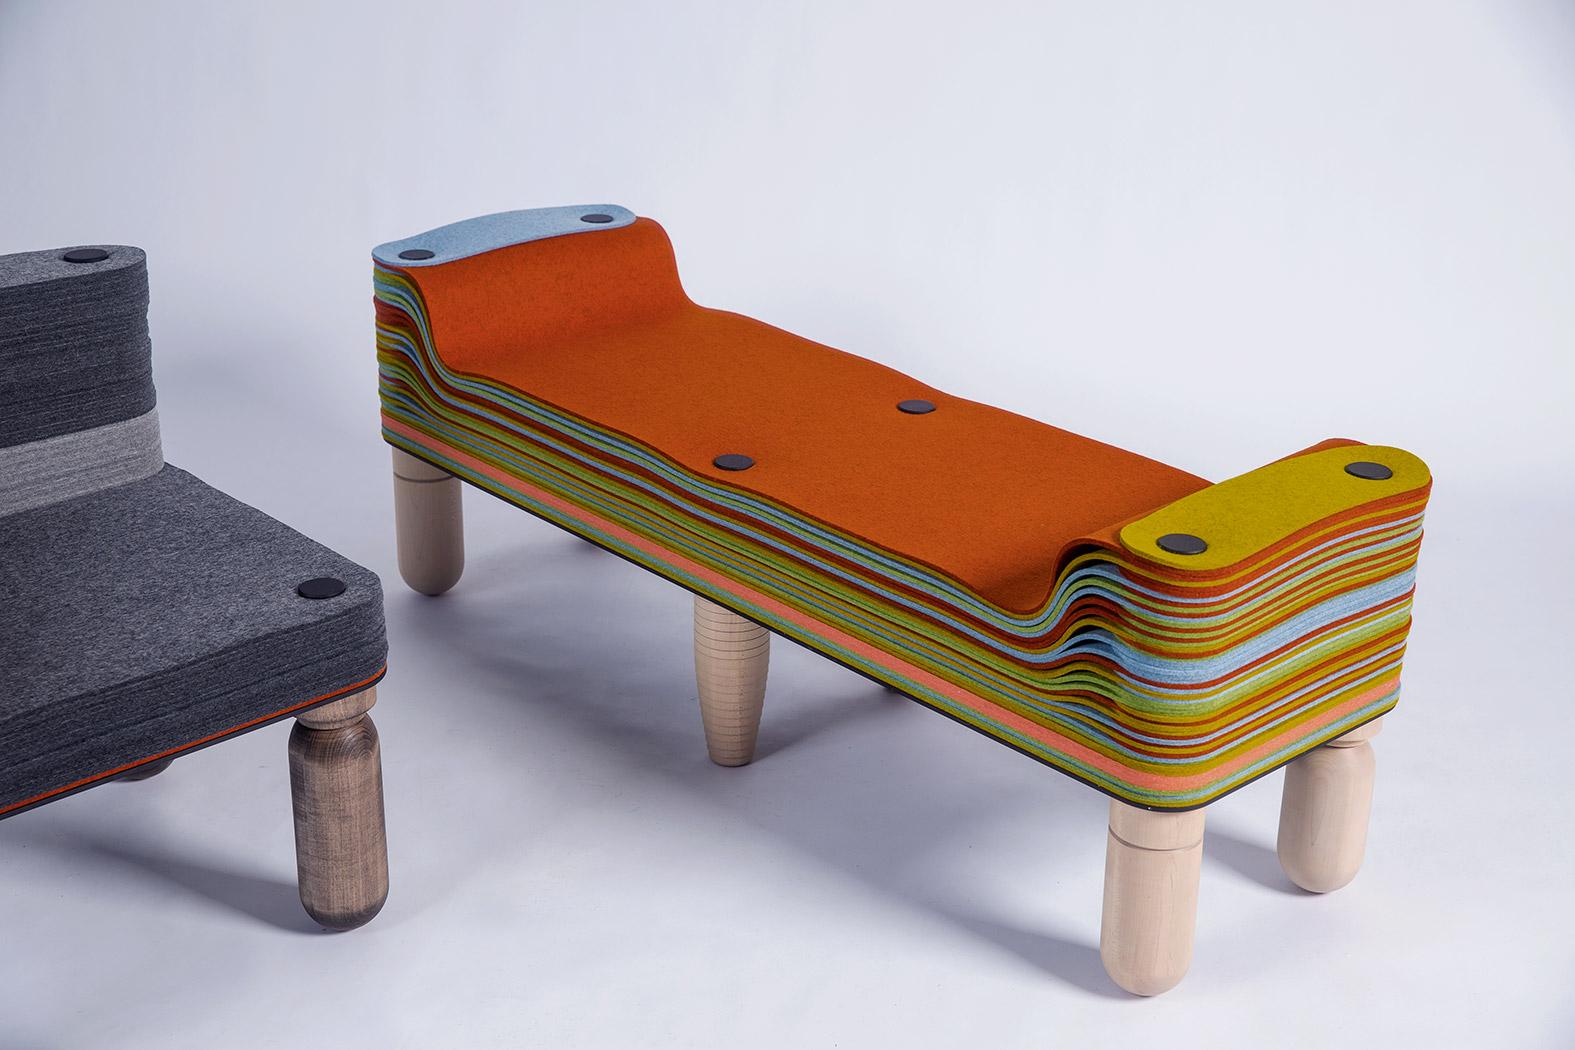 Canadian Maxine B, Felt and Wood Bench, Benoist F. Drut in STACKABL, Canada, 2021 For Sale